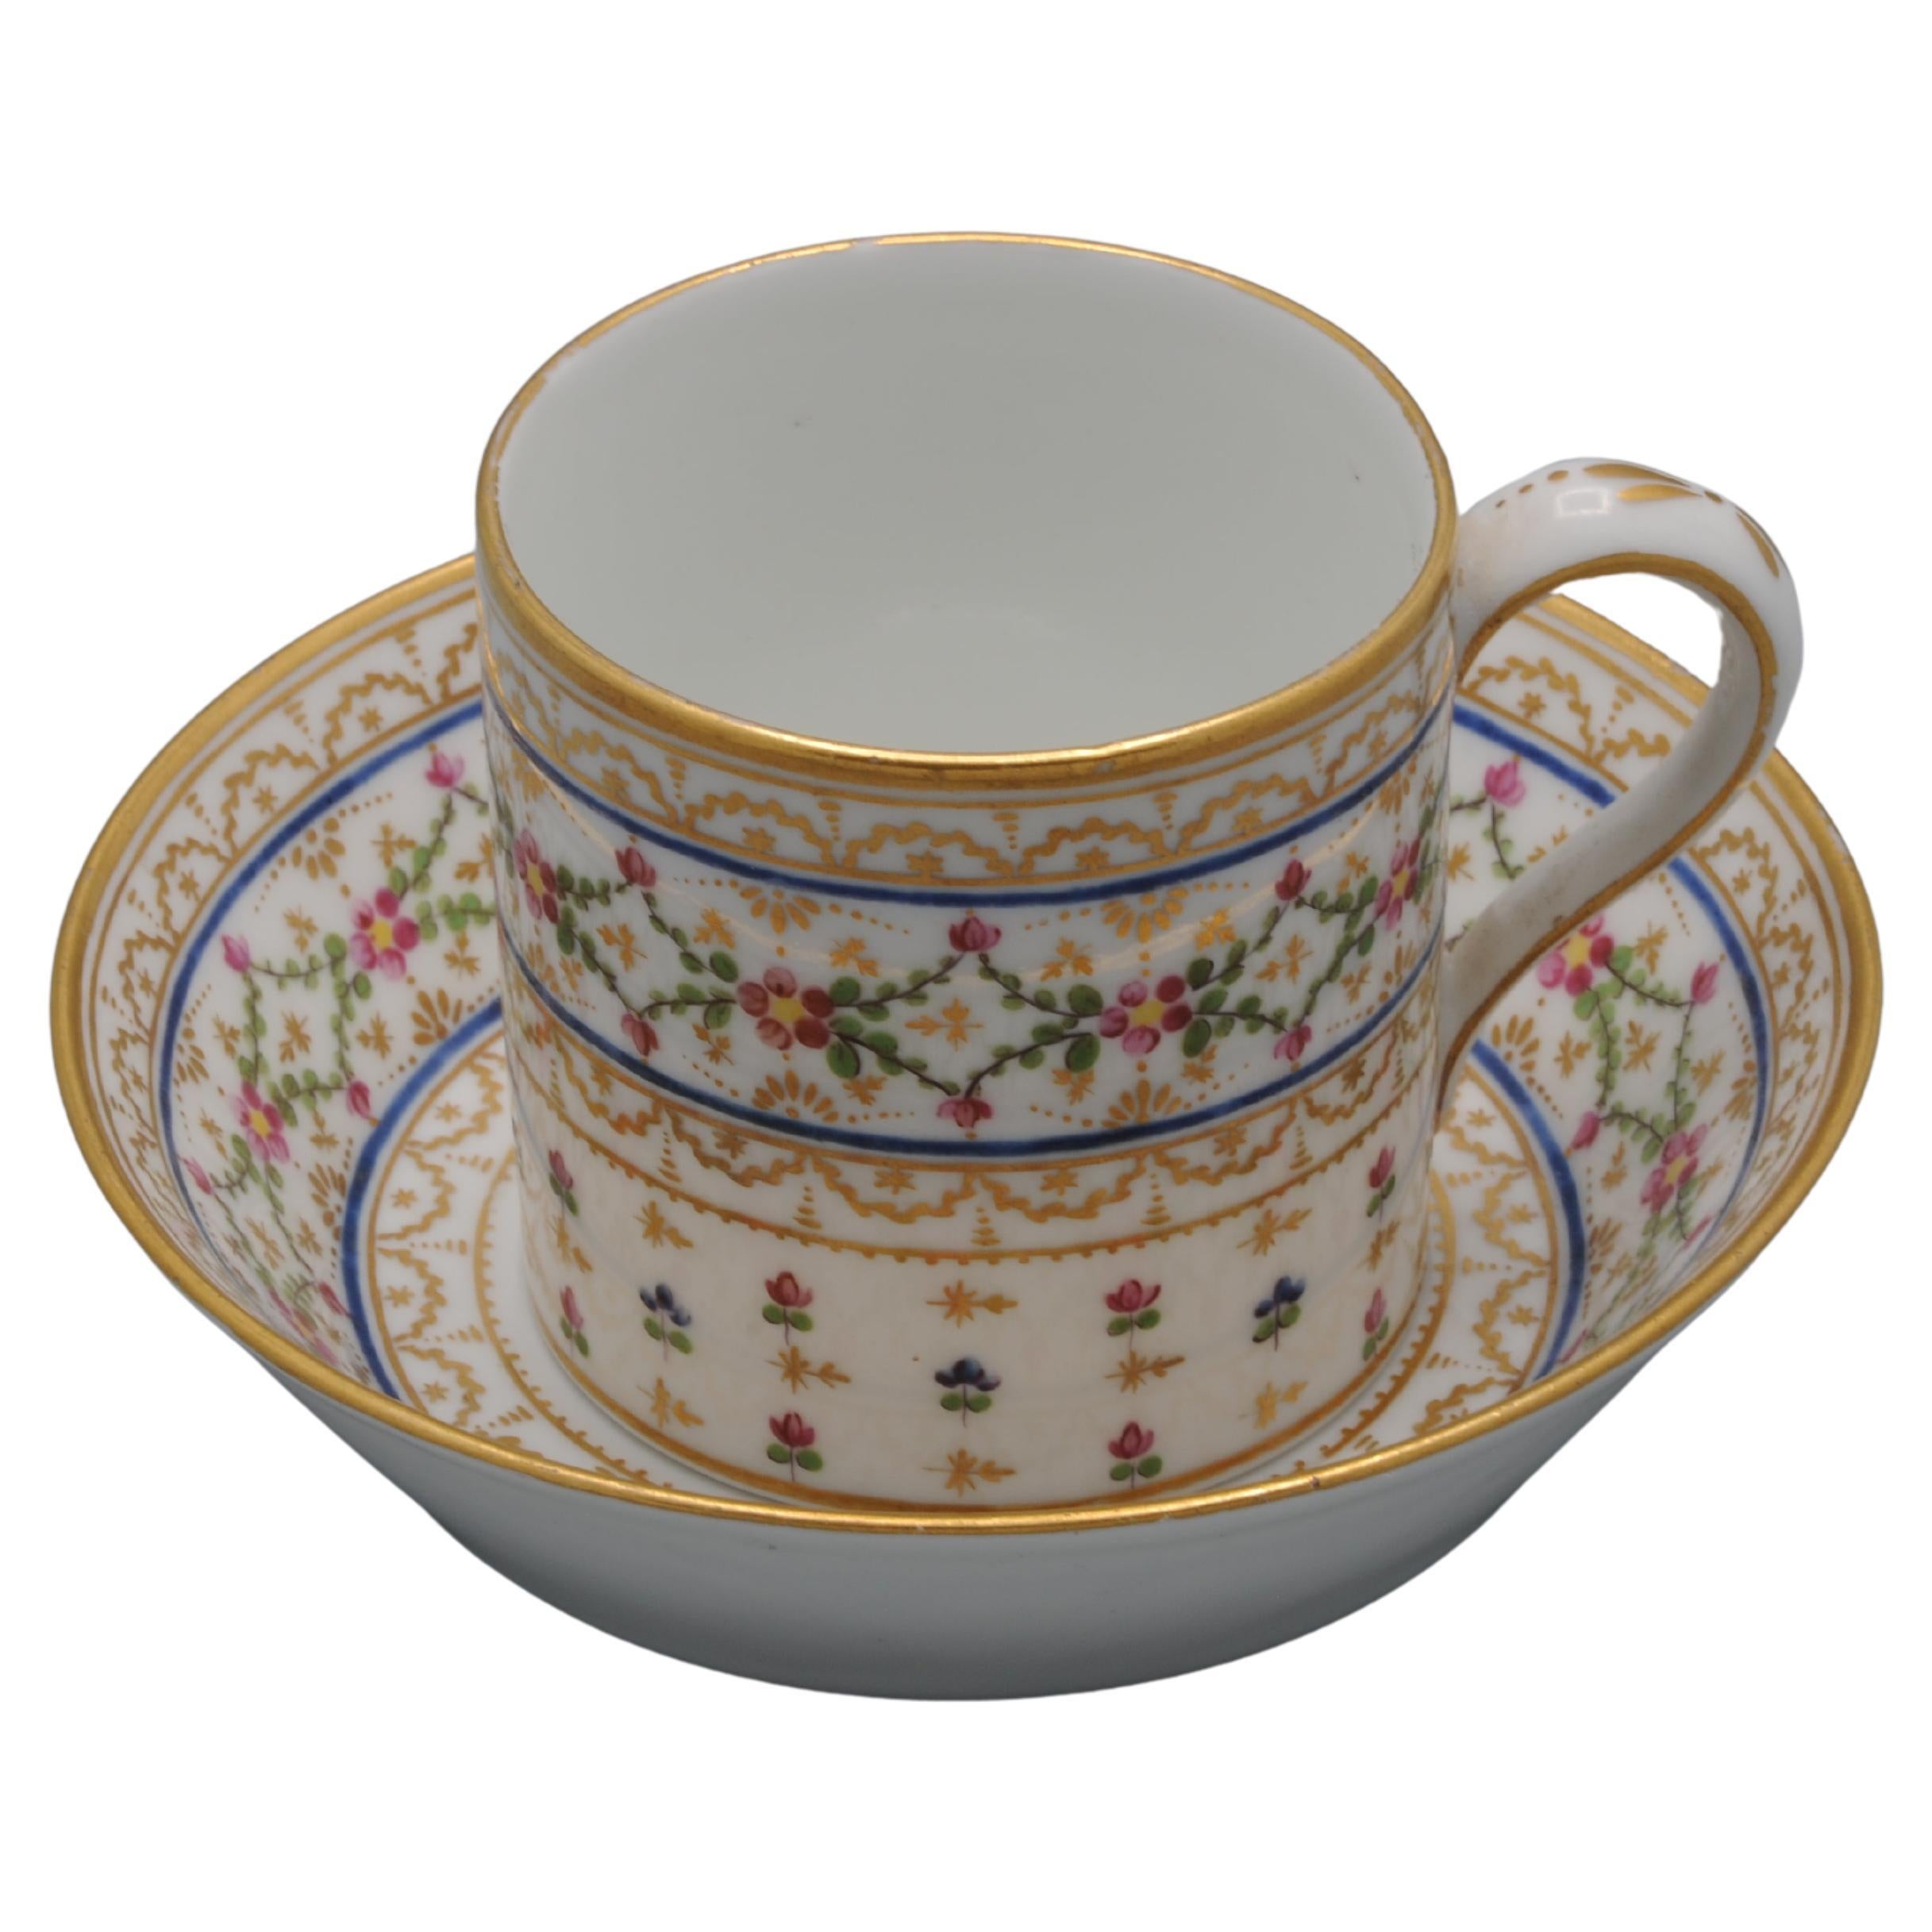 André Leboeuf, Manufacture à la Reine' - Cup and saucer 'Litron', late 18th For Sale